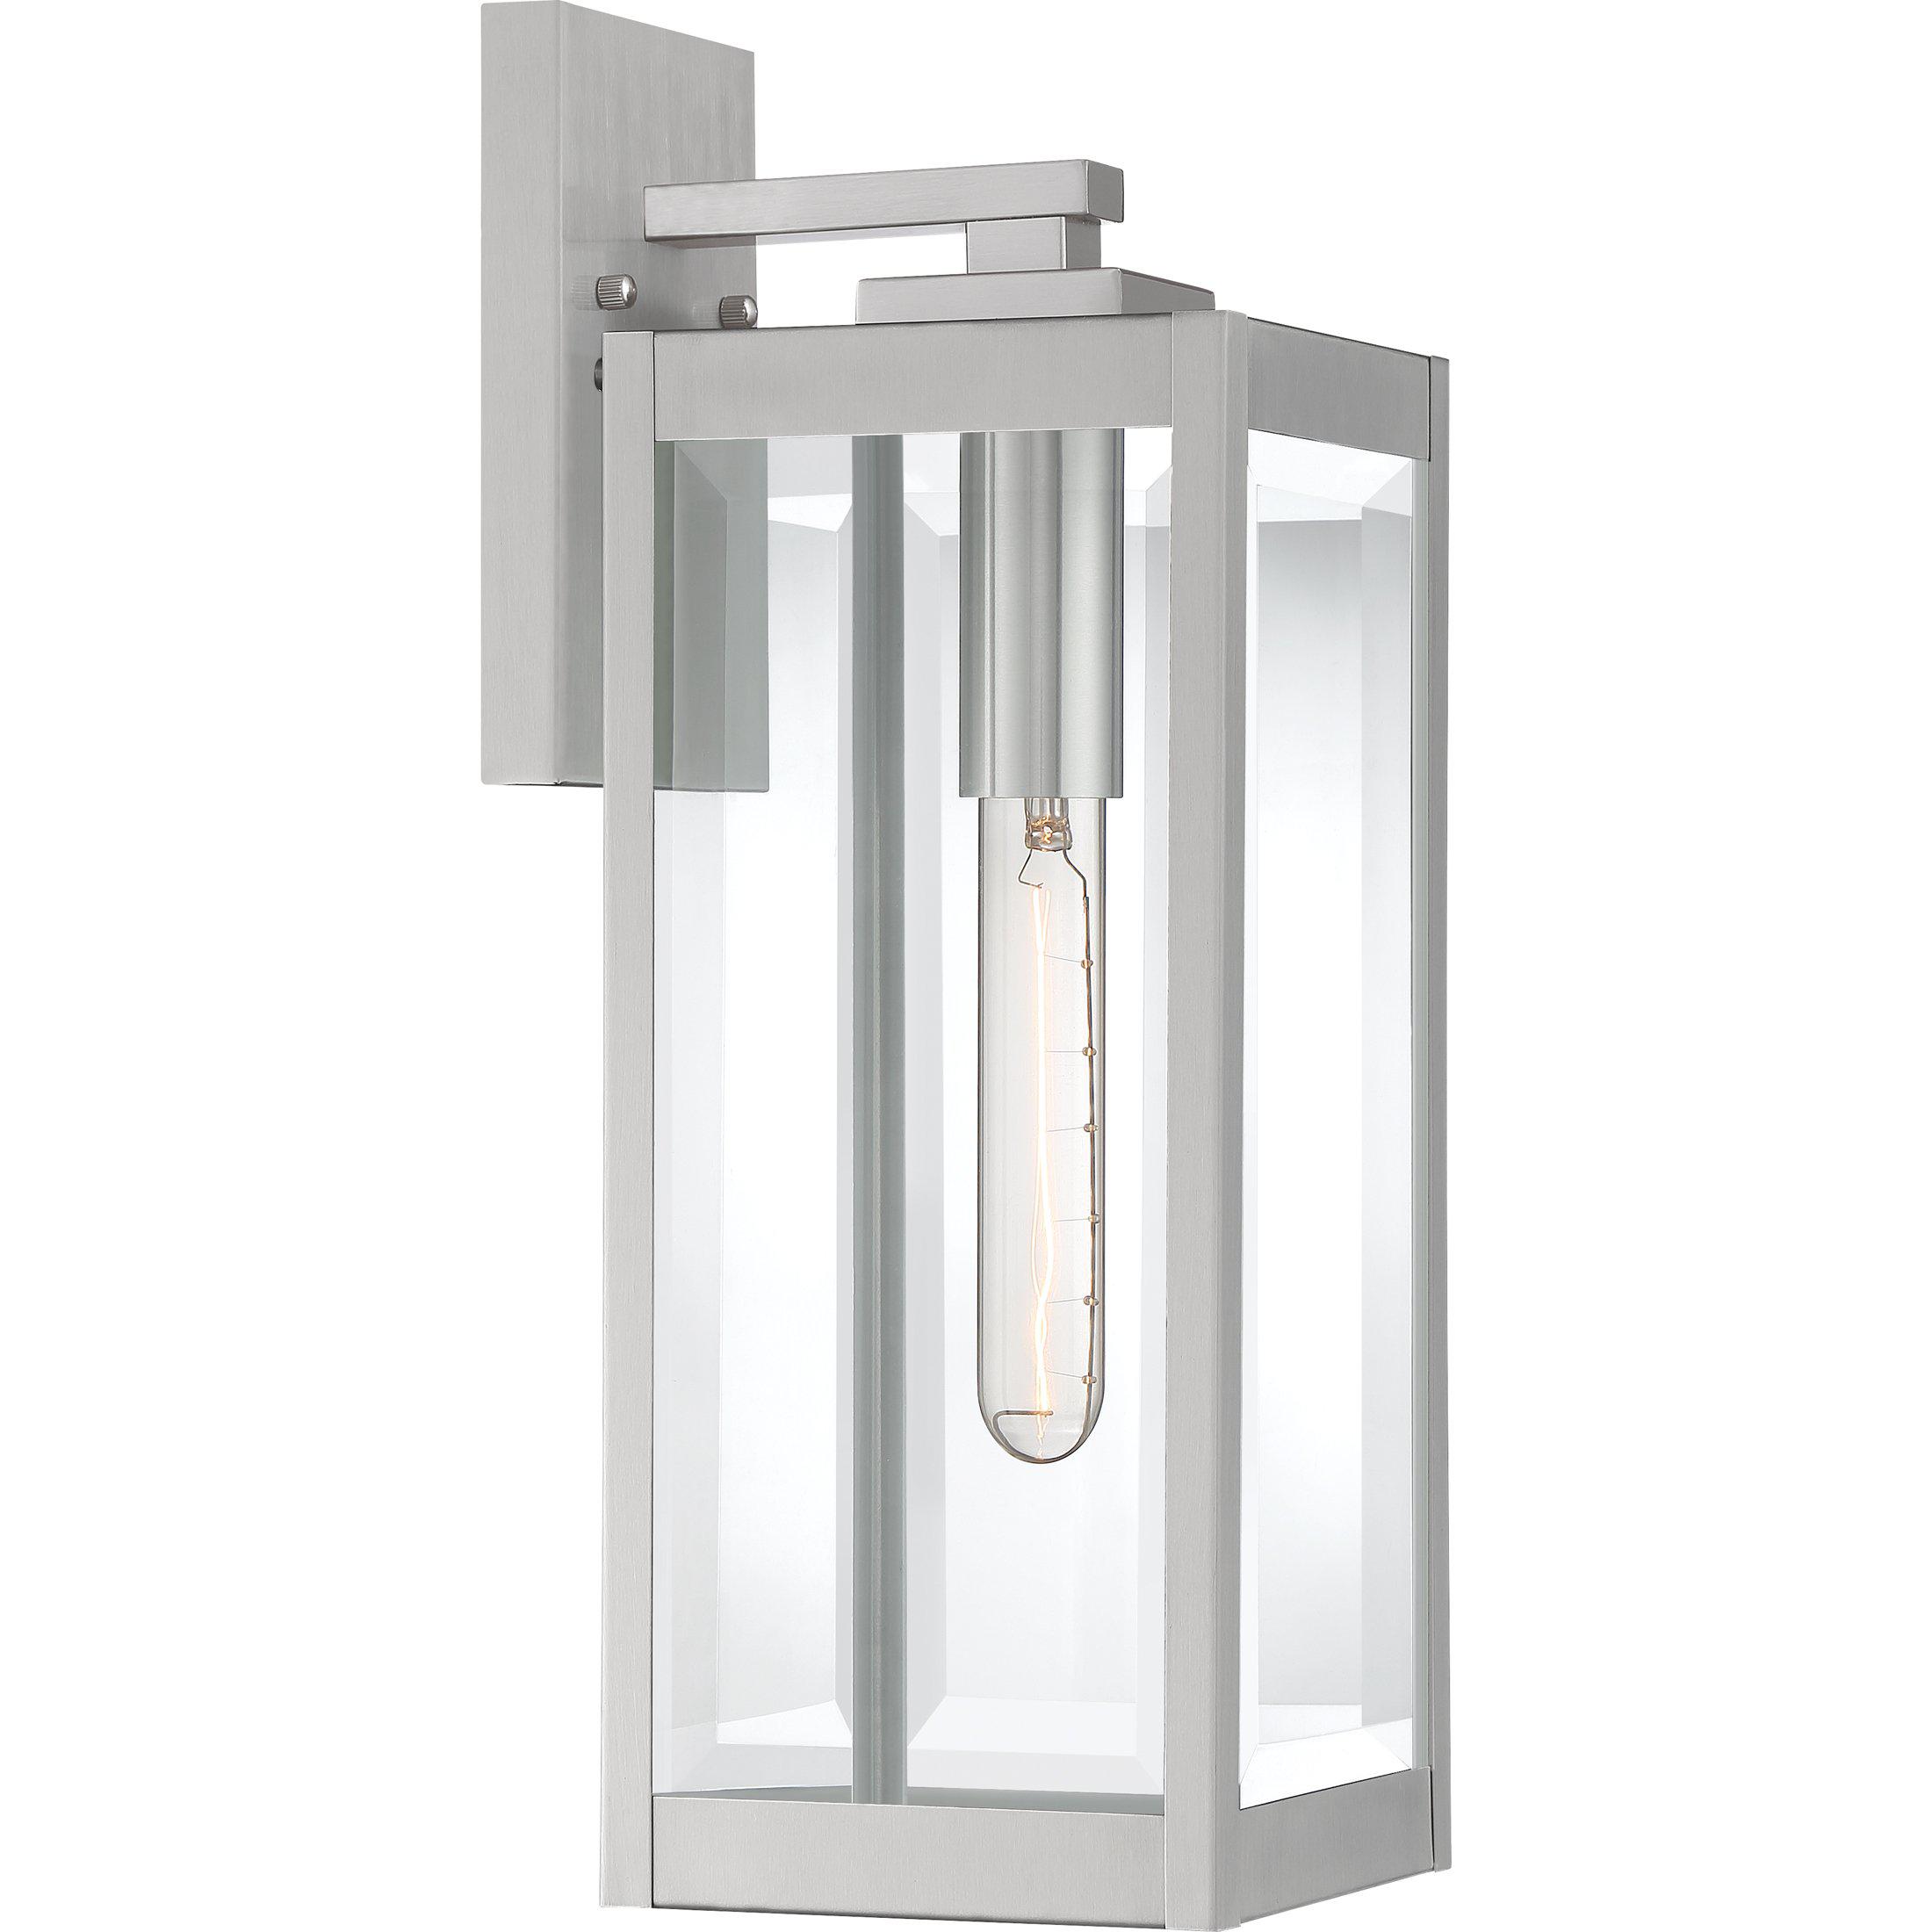 Quoizel  Westover Outdoor Lantern, Medium WVR8406 Outdoor l Wall Quoizel Stainless Steel  